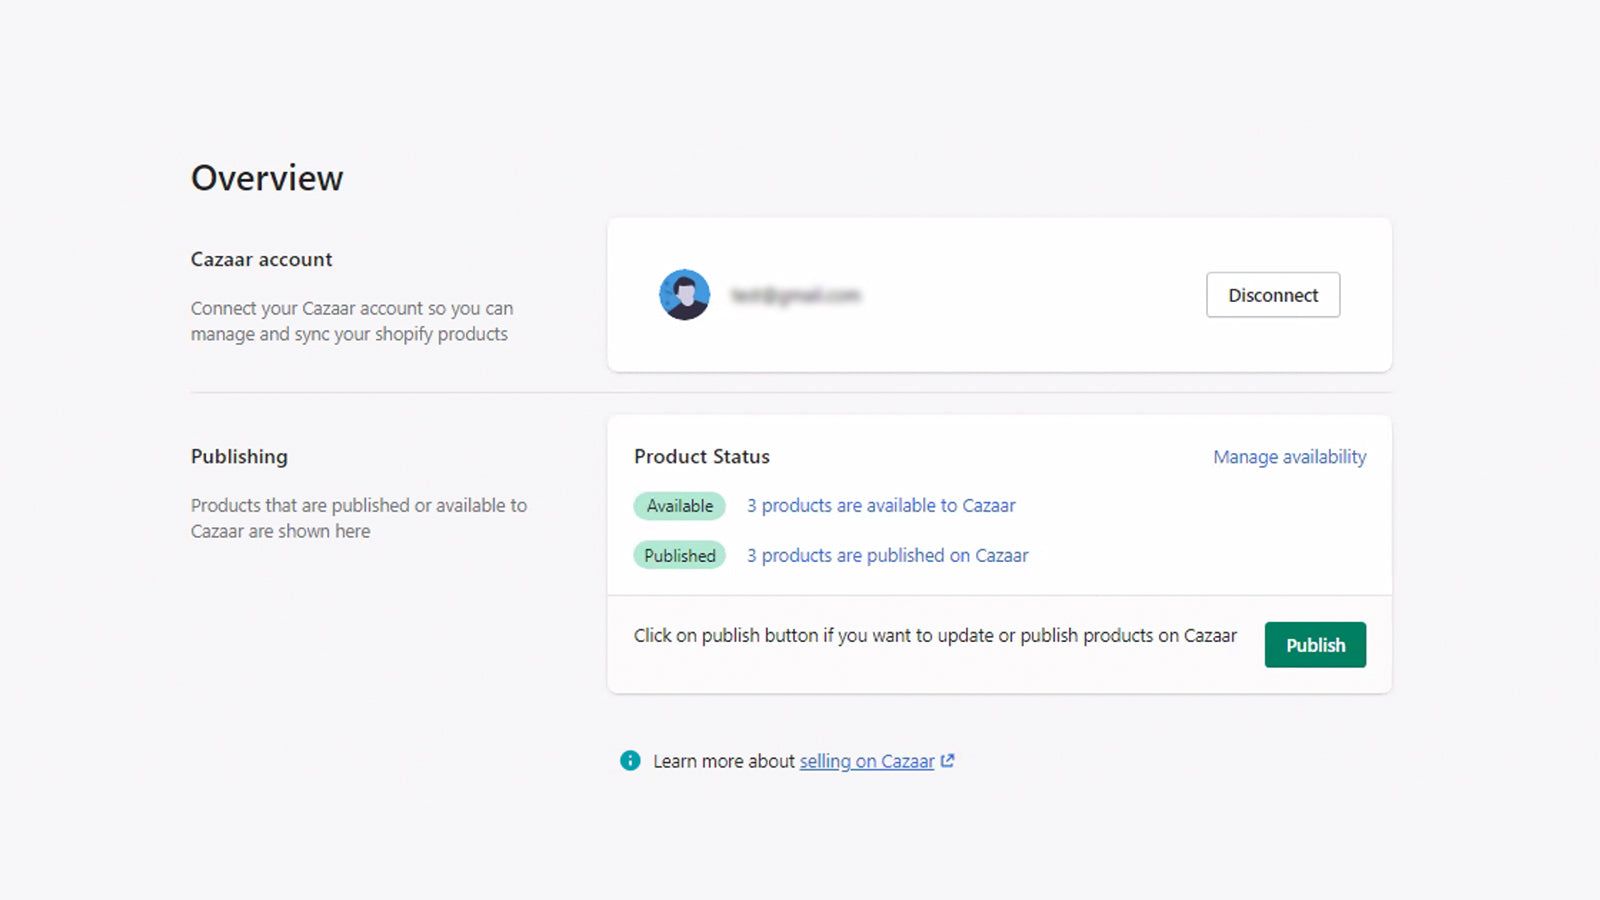 Publish products on Cazaar